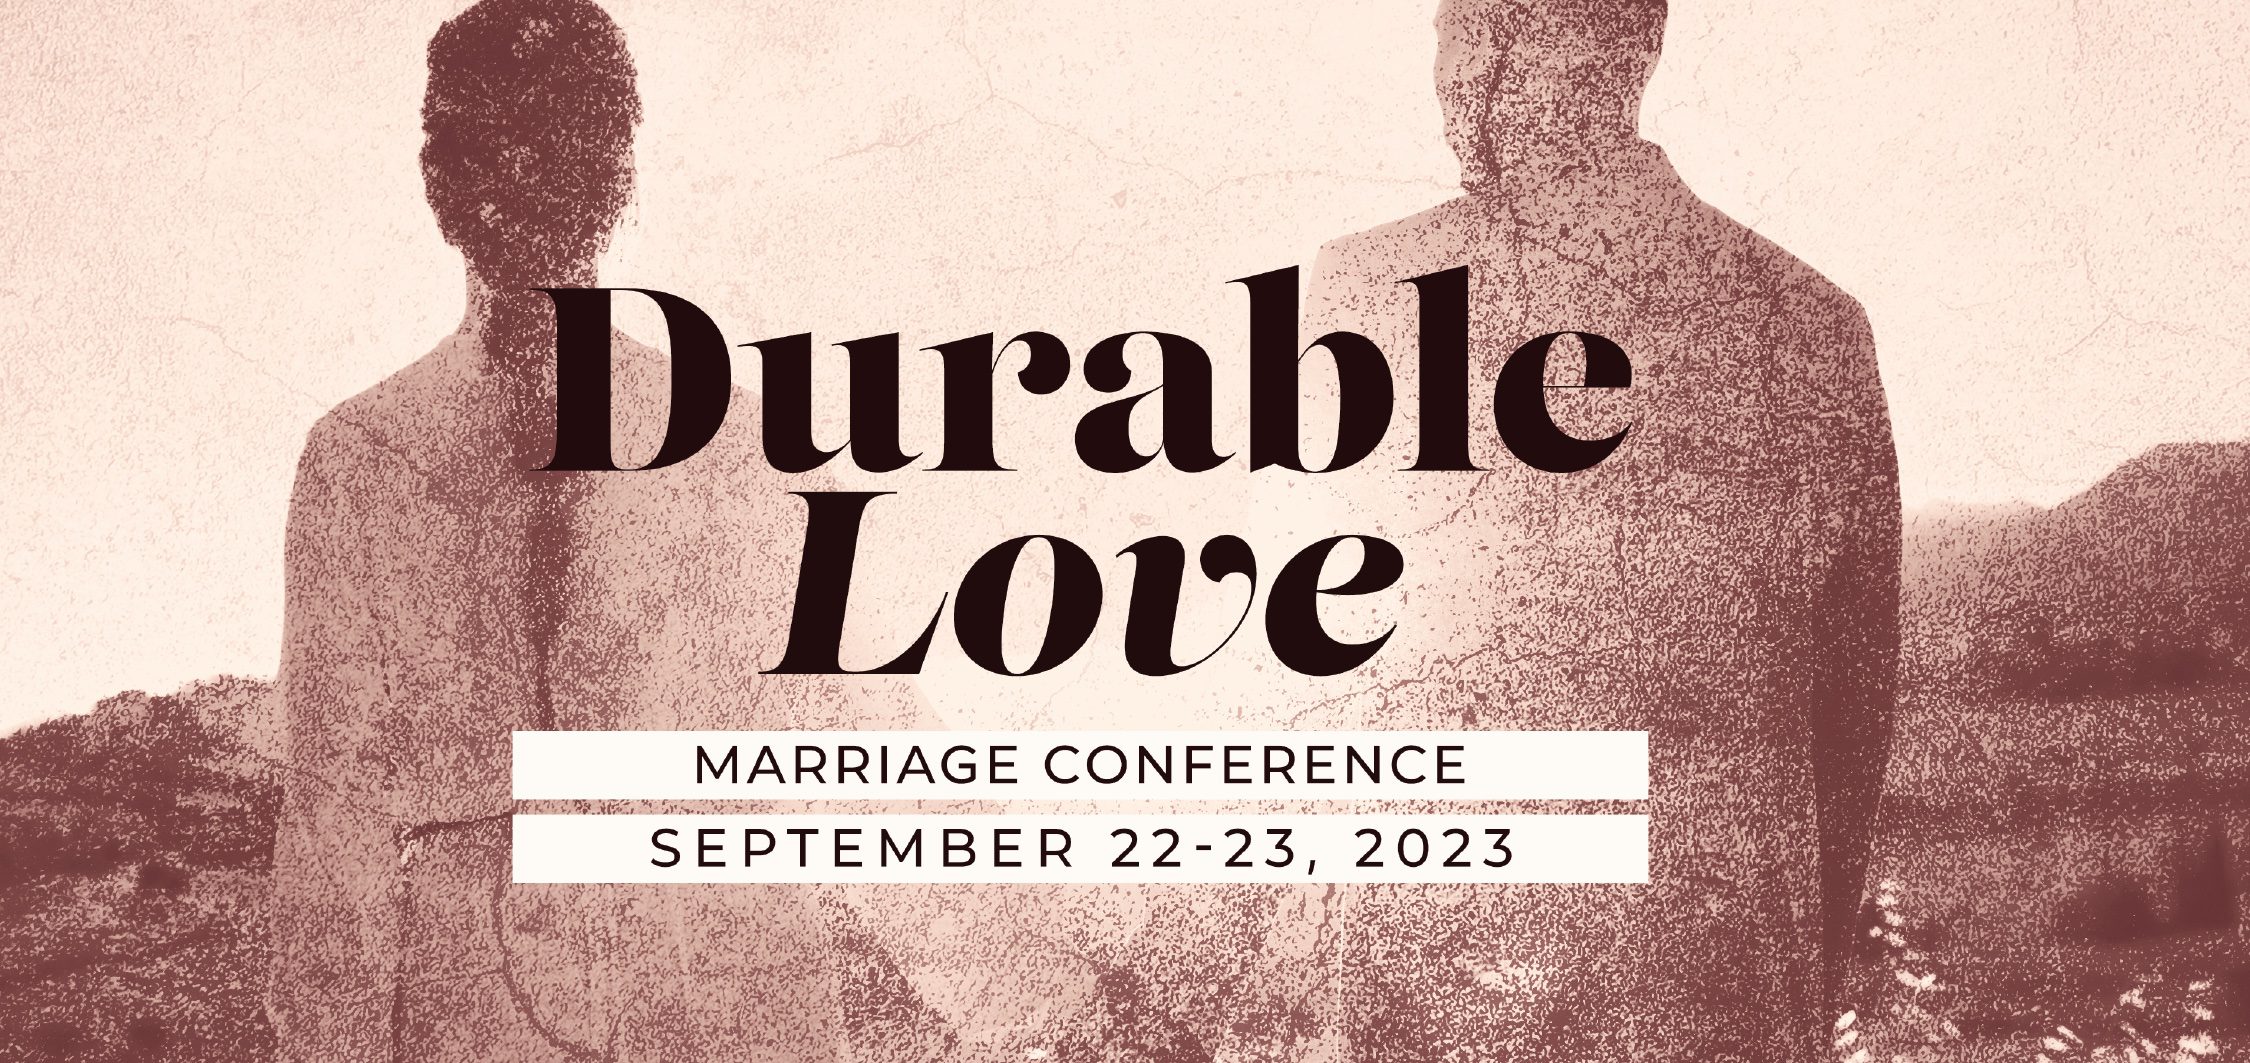 Durable Love - Marriage Conference -September 22-23, 2023